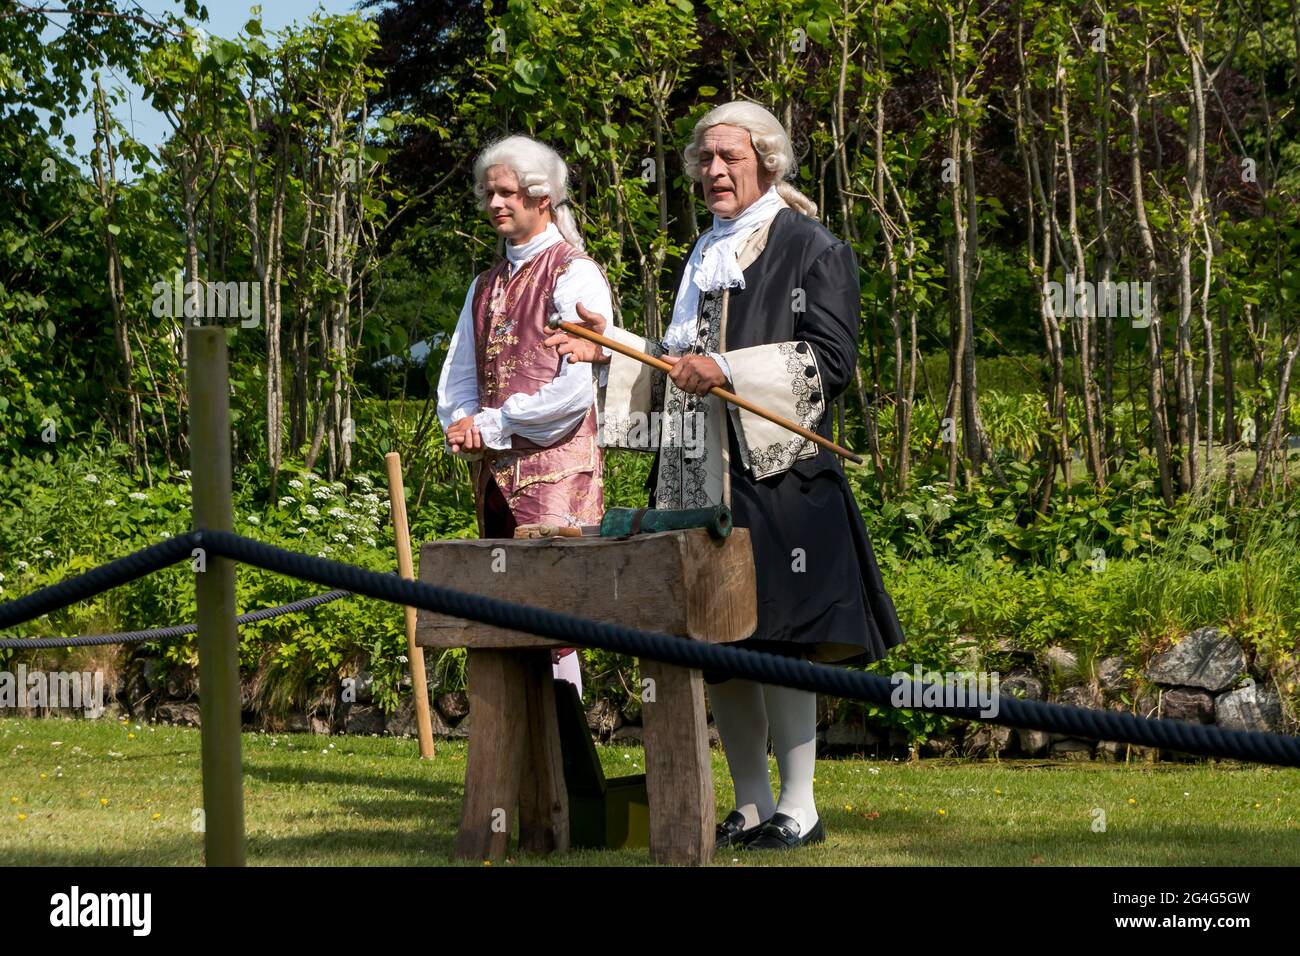 Auning, Denmark - 19 June 2021: 18th century day at Gammel Estrup Castle, People are dressed as in the 18th century and everything passes as then. Peo Stock Photo